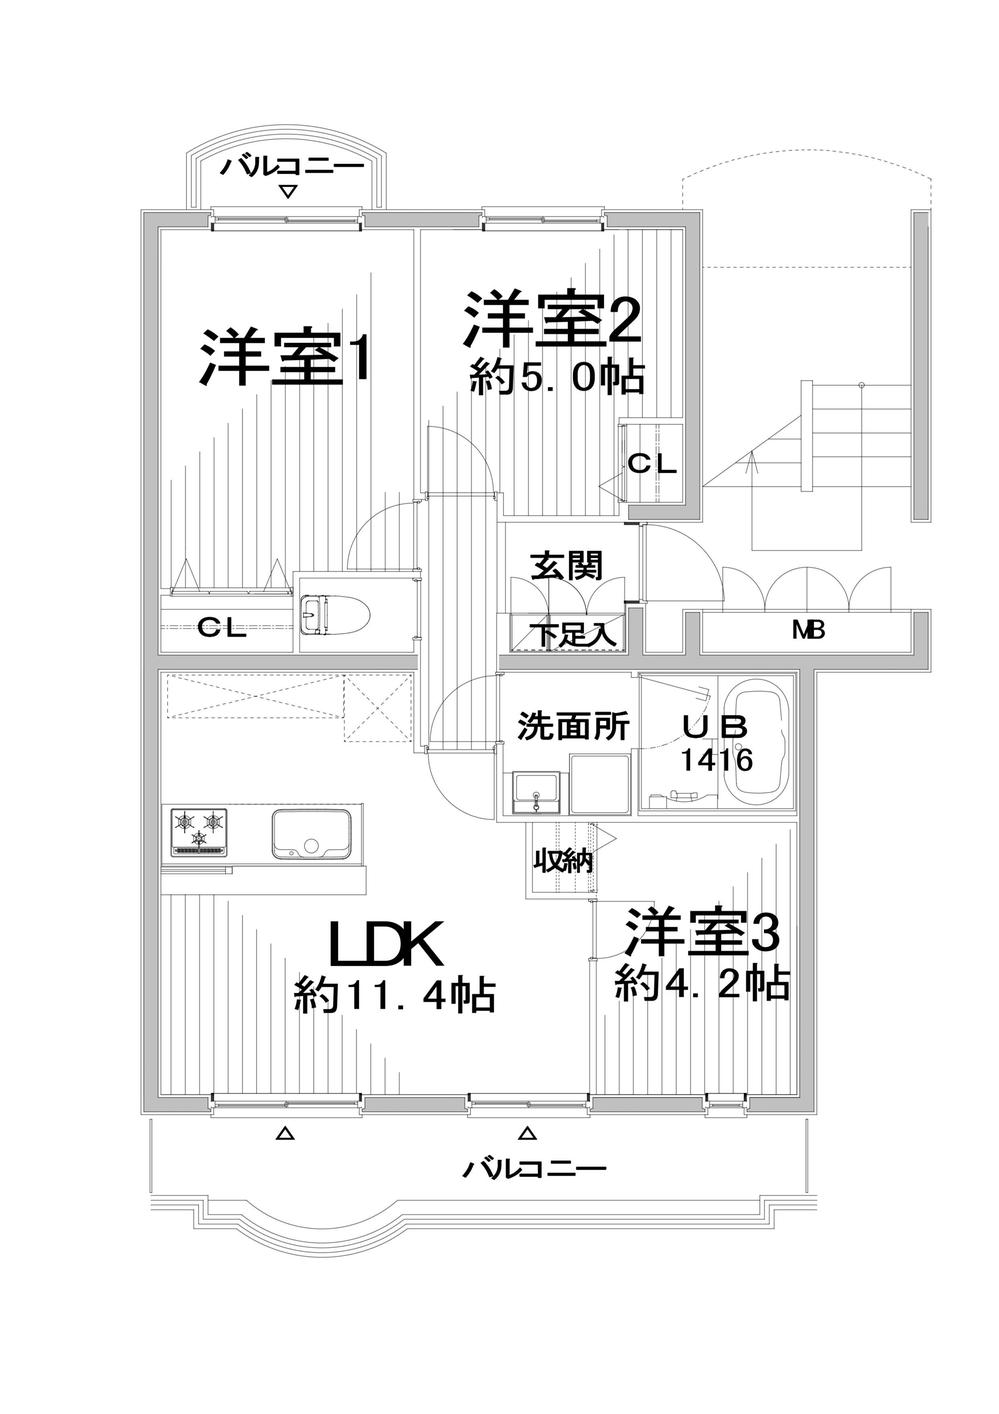 Floor plan. 3LDK, Price 22,400,000 yen, Occupied area 57.64 sq m , Balcony area 7.9 sq m storage also abundantly available. Per yang, Ventilation is good. Floor plan will be inverted type.